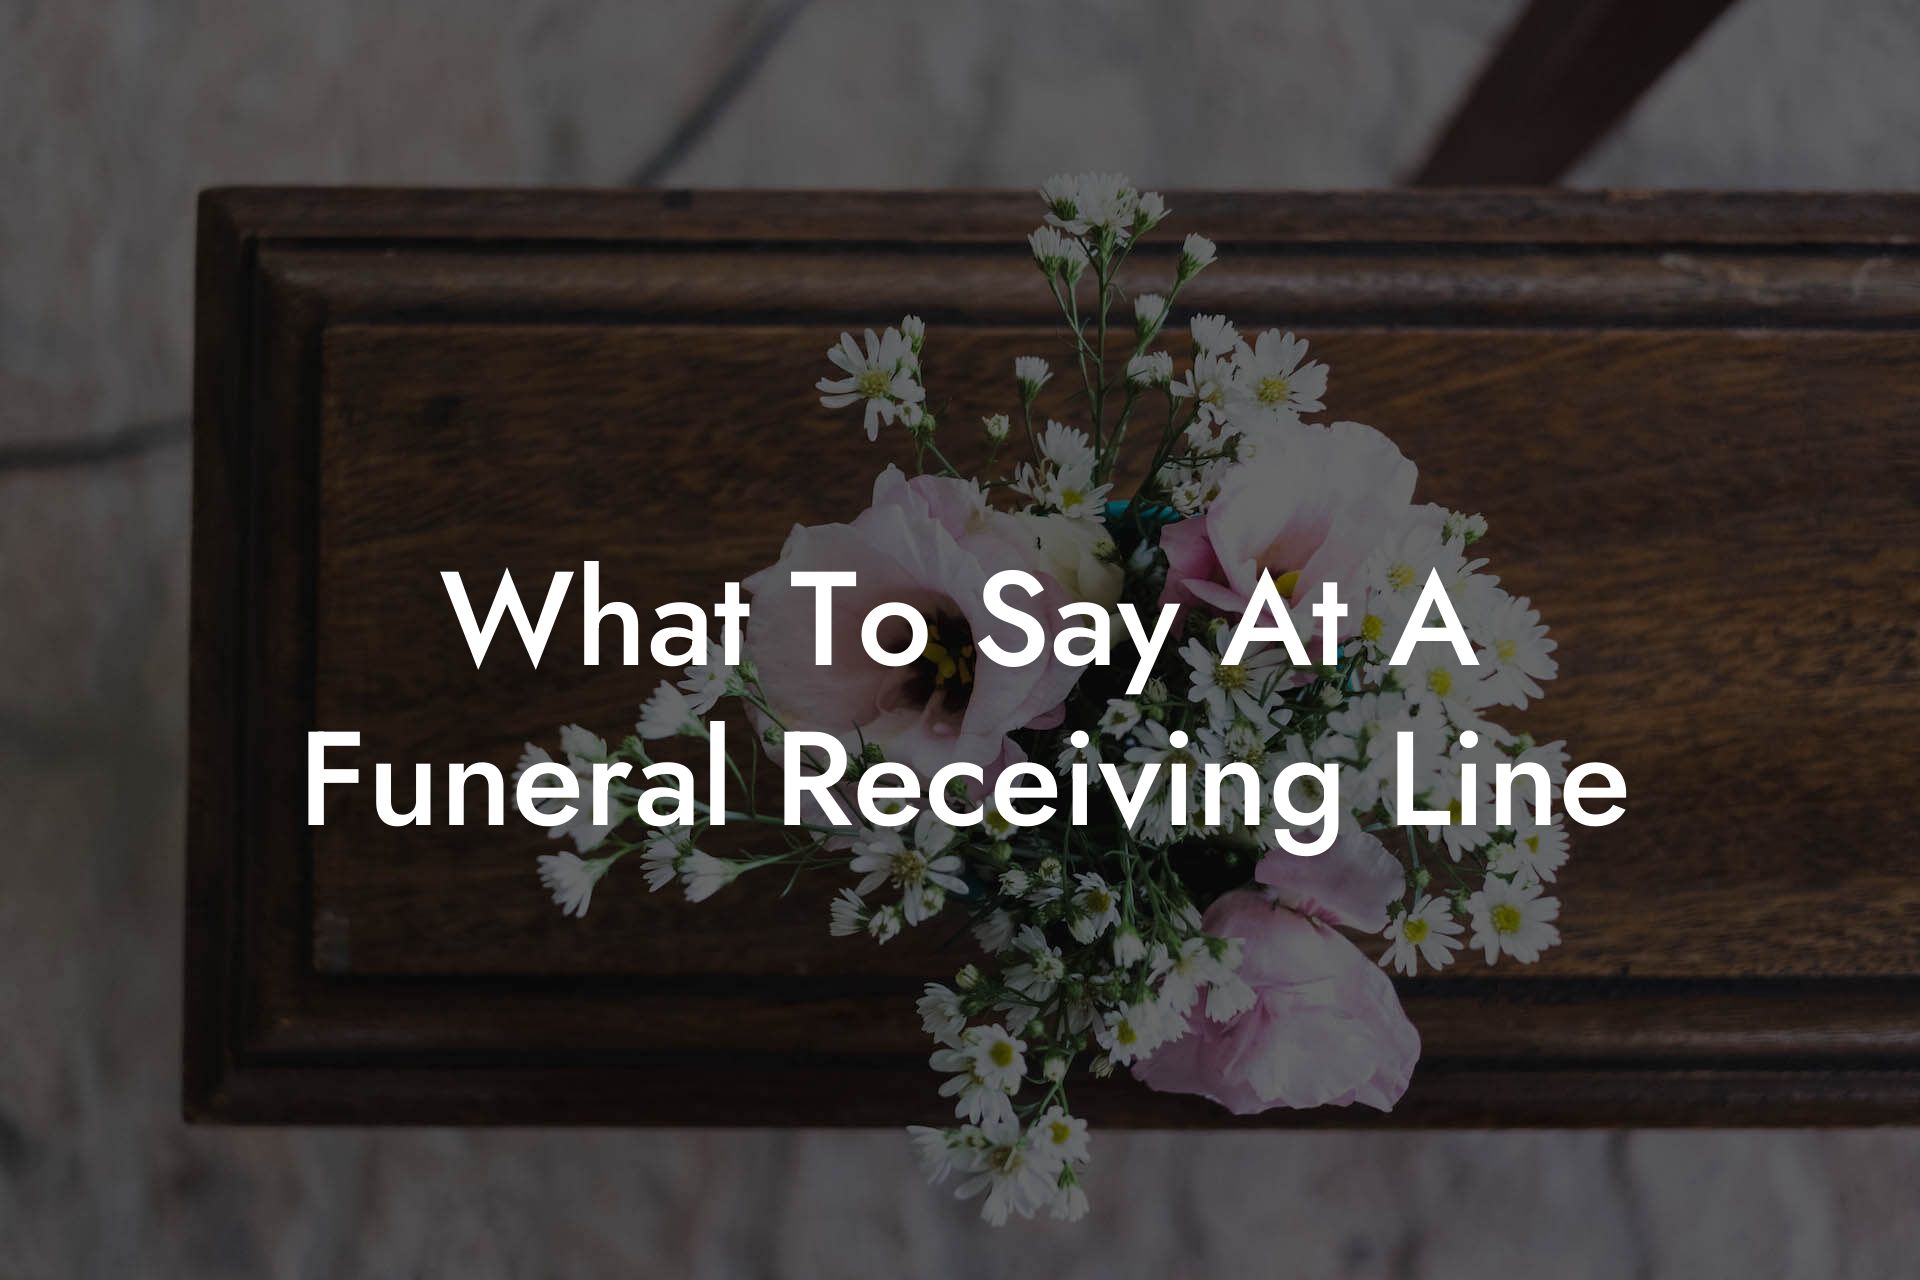 What To Say At A Funeral Receiving Line